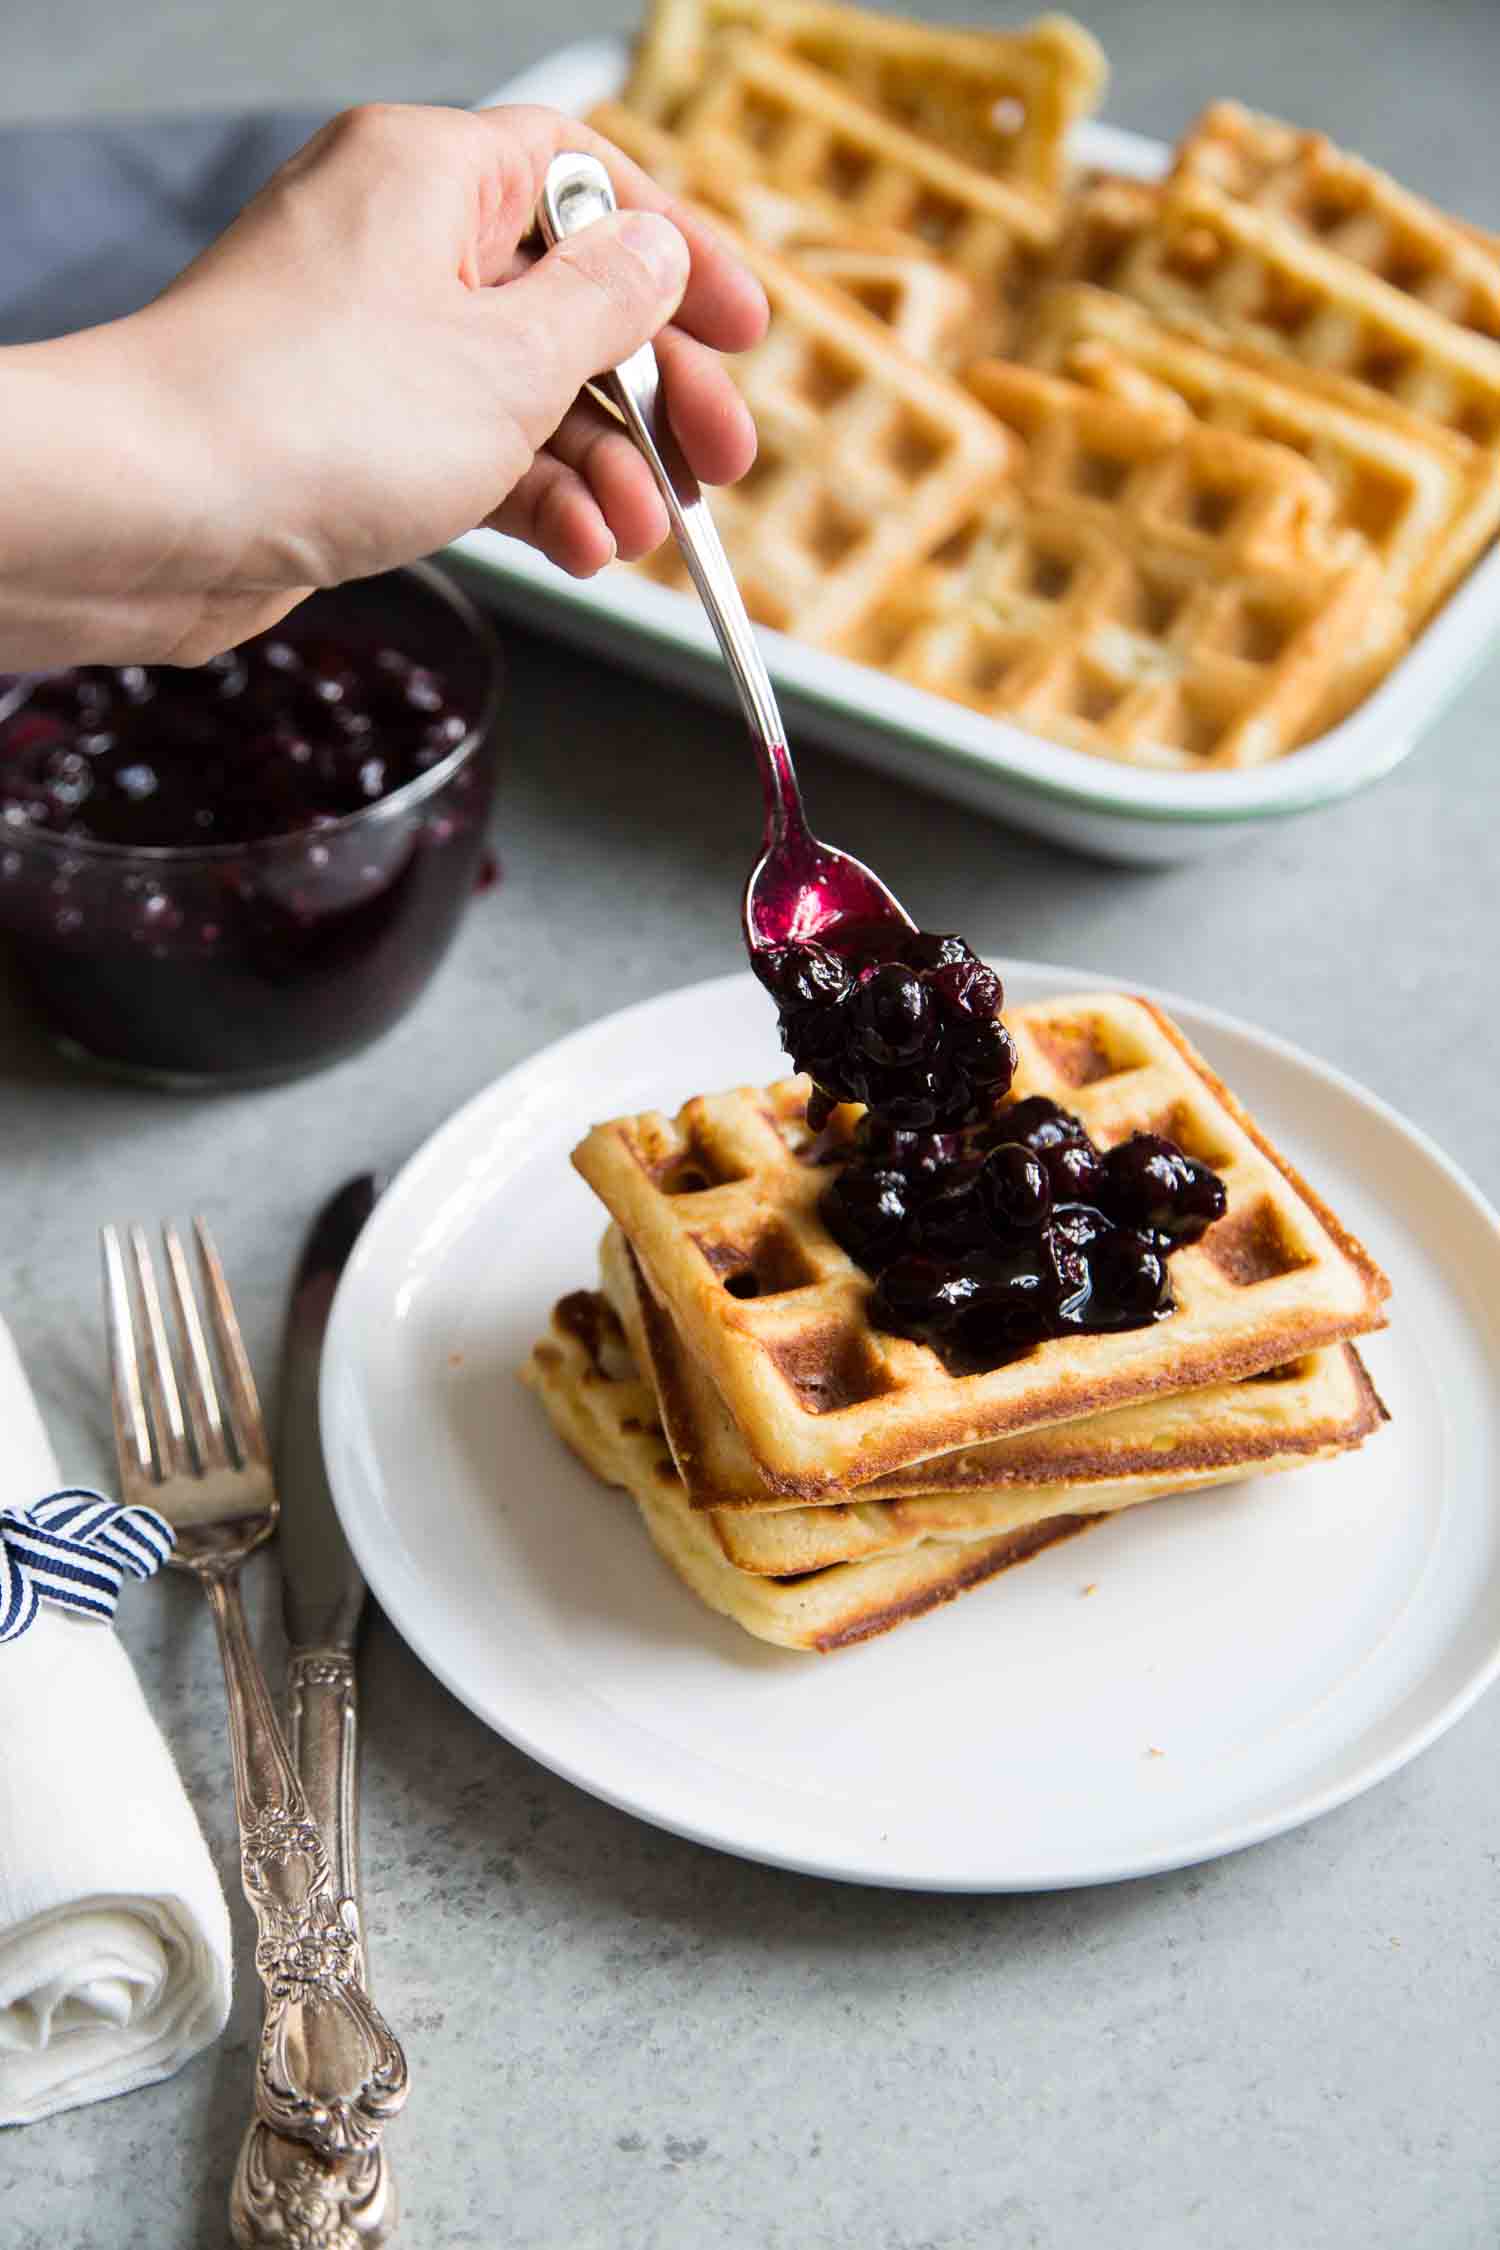 Buttermilk Waffles with Ginger Blueberry Sauce